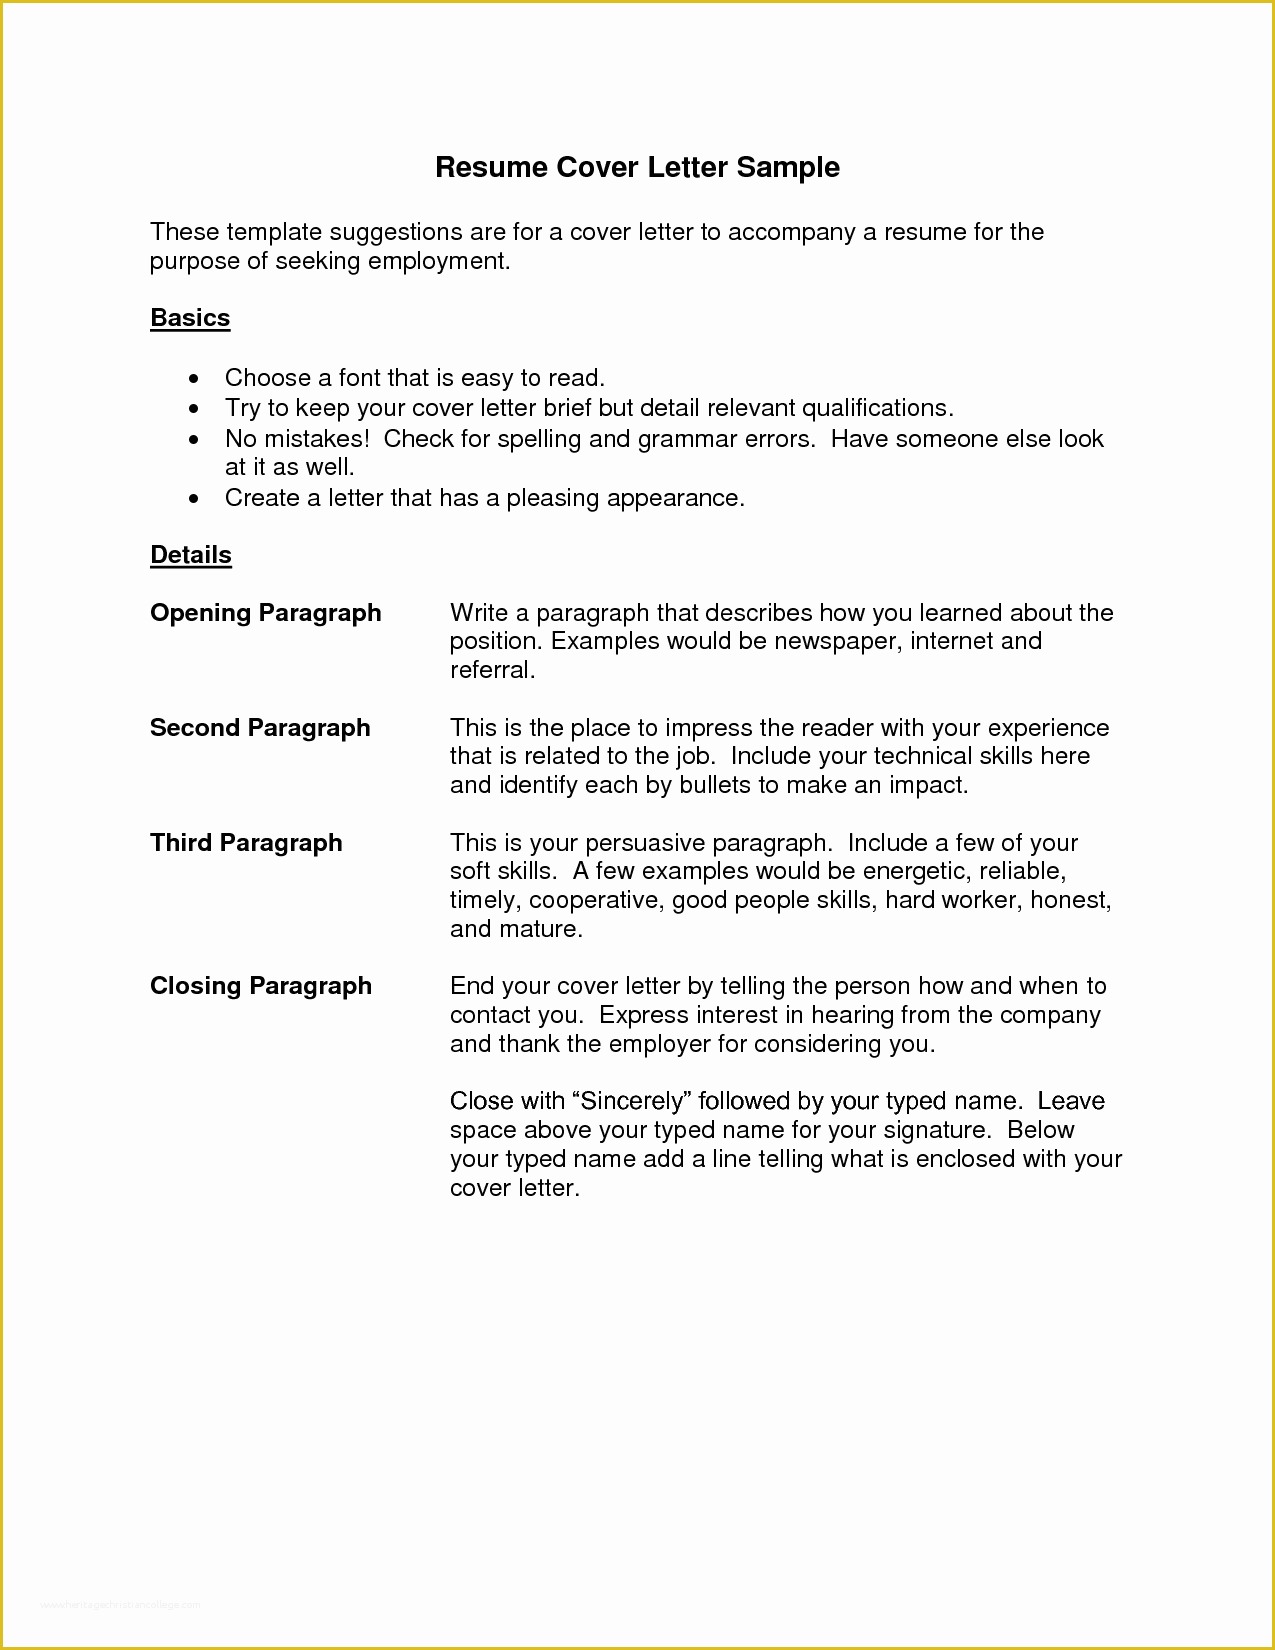 Free Online Resume Cover Letter Template Of Cover Letter Resume Best Templatesimple Cover Letter